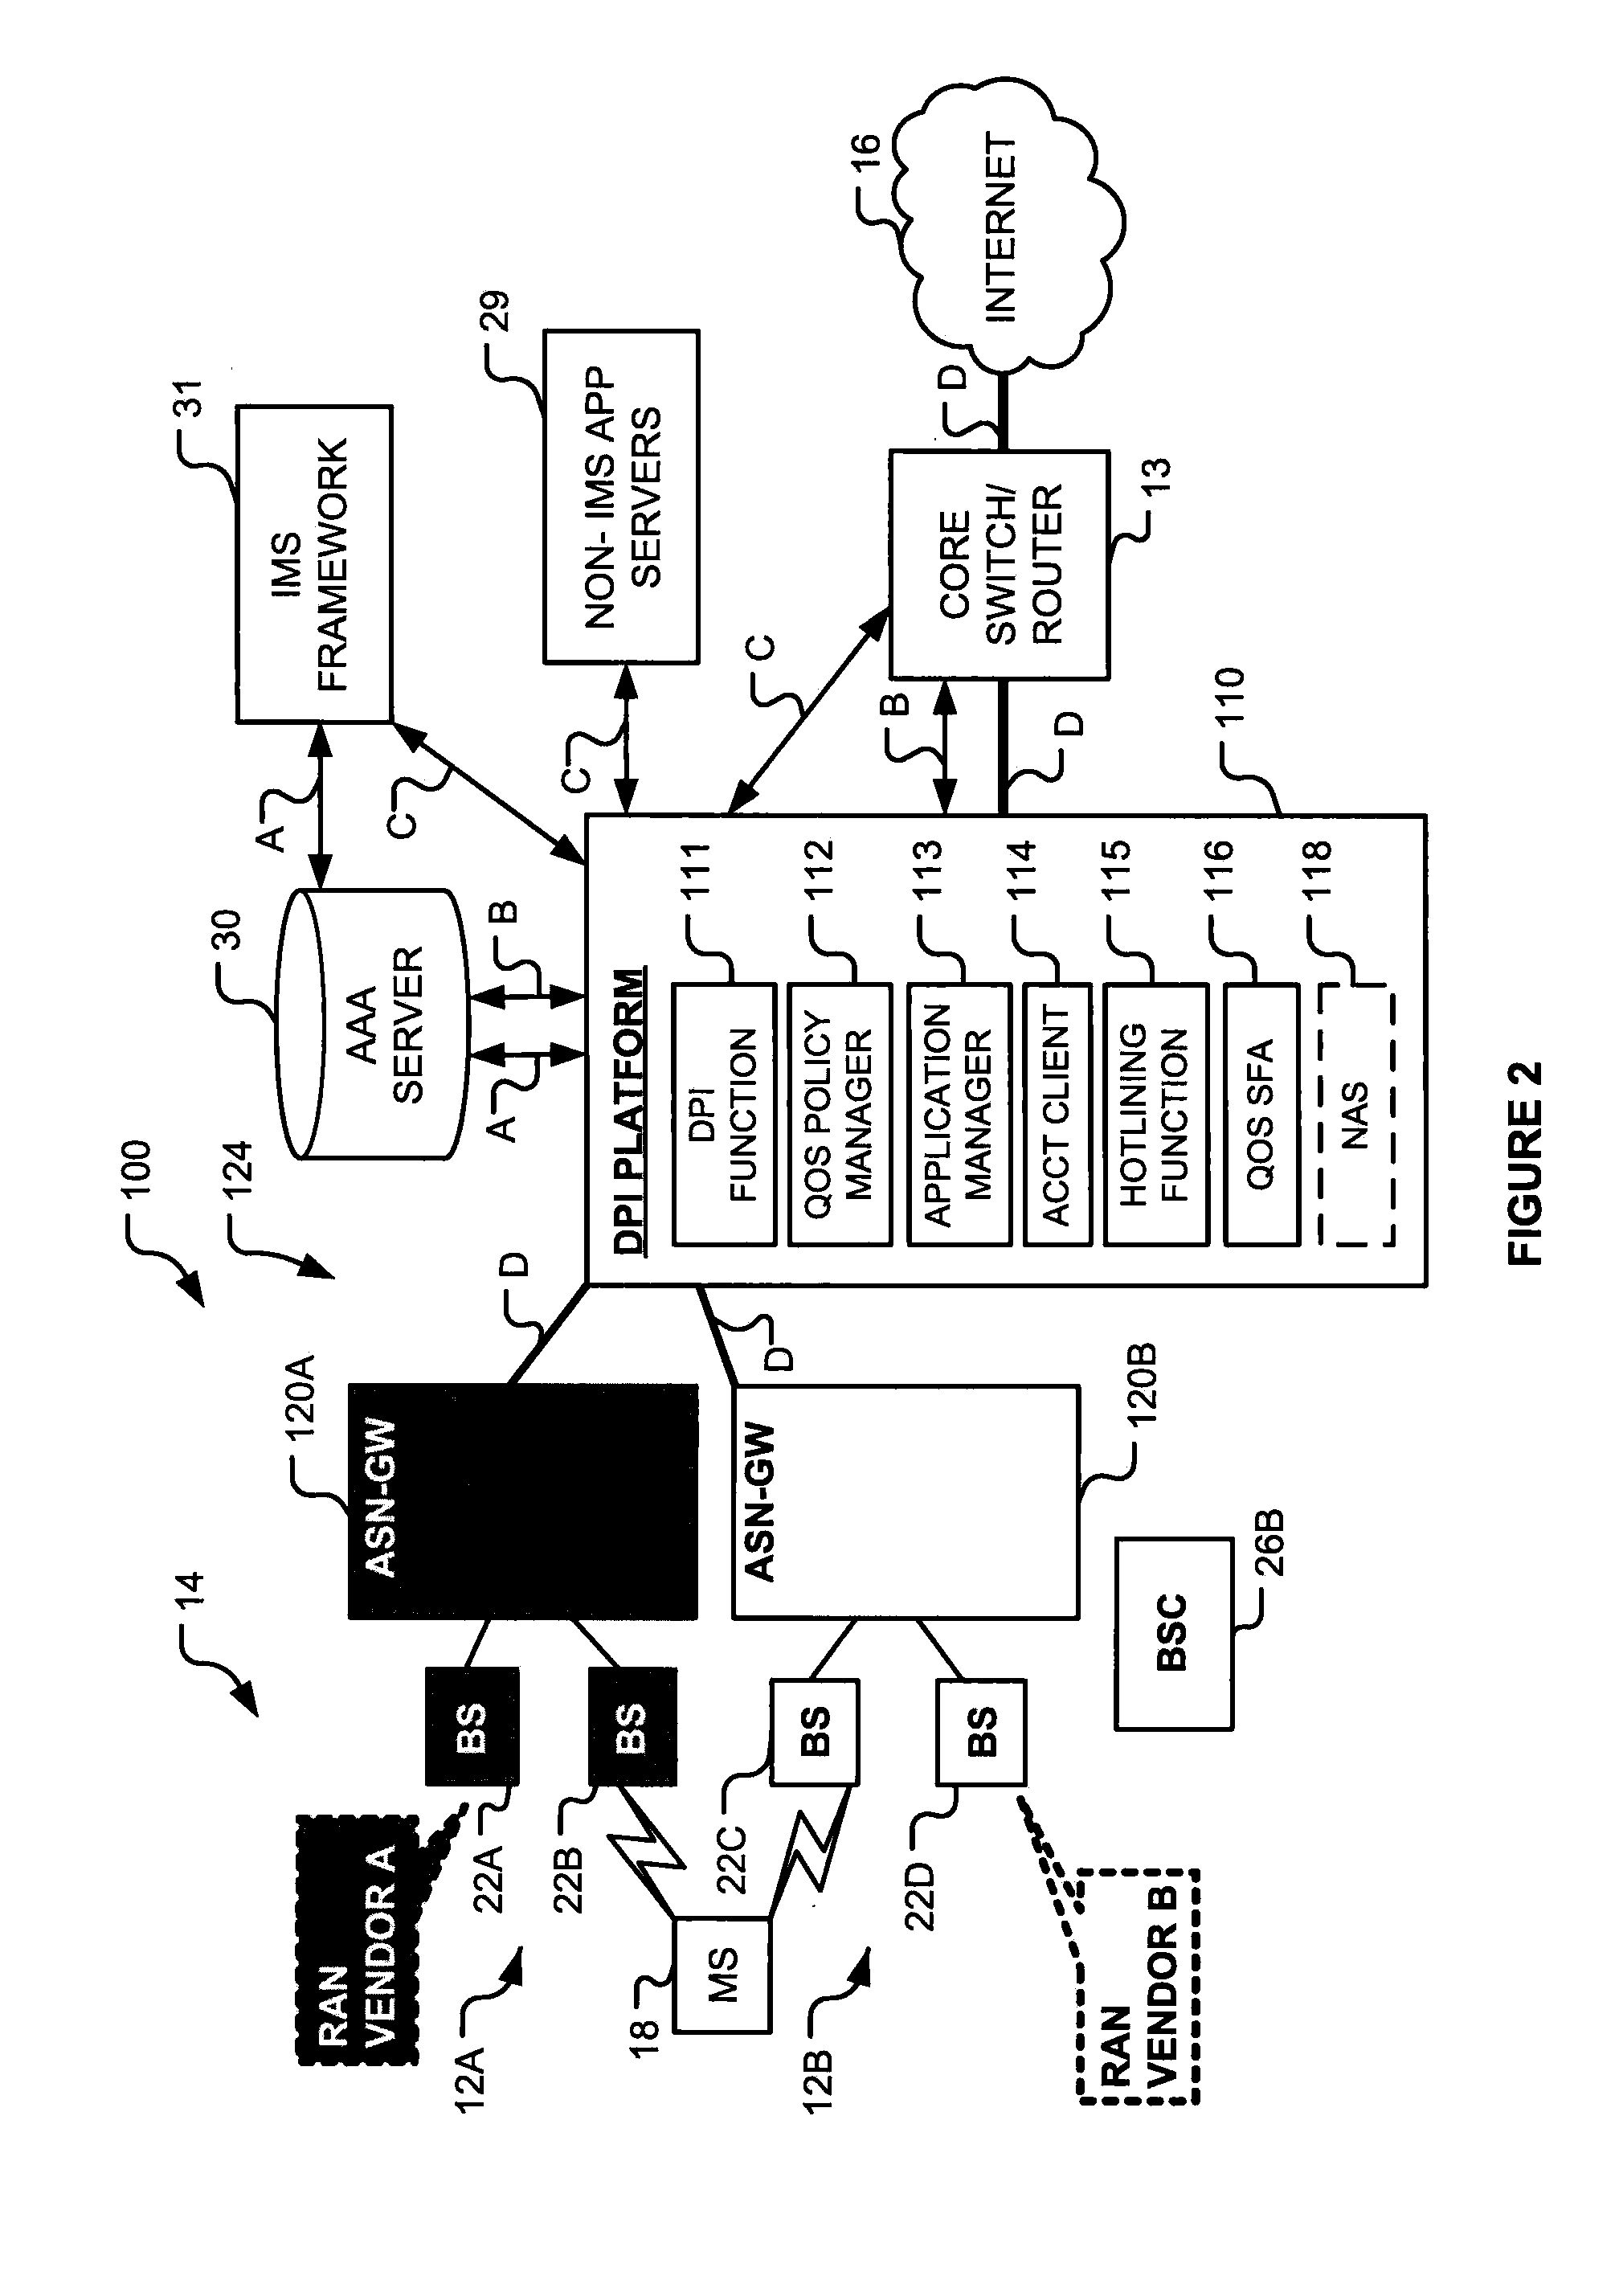 Subscriber management system for a communication network